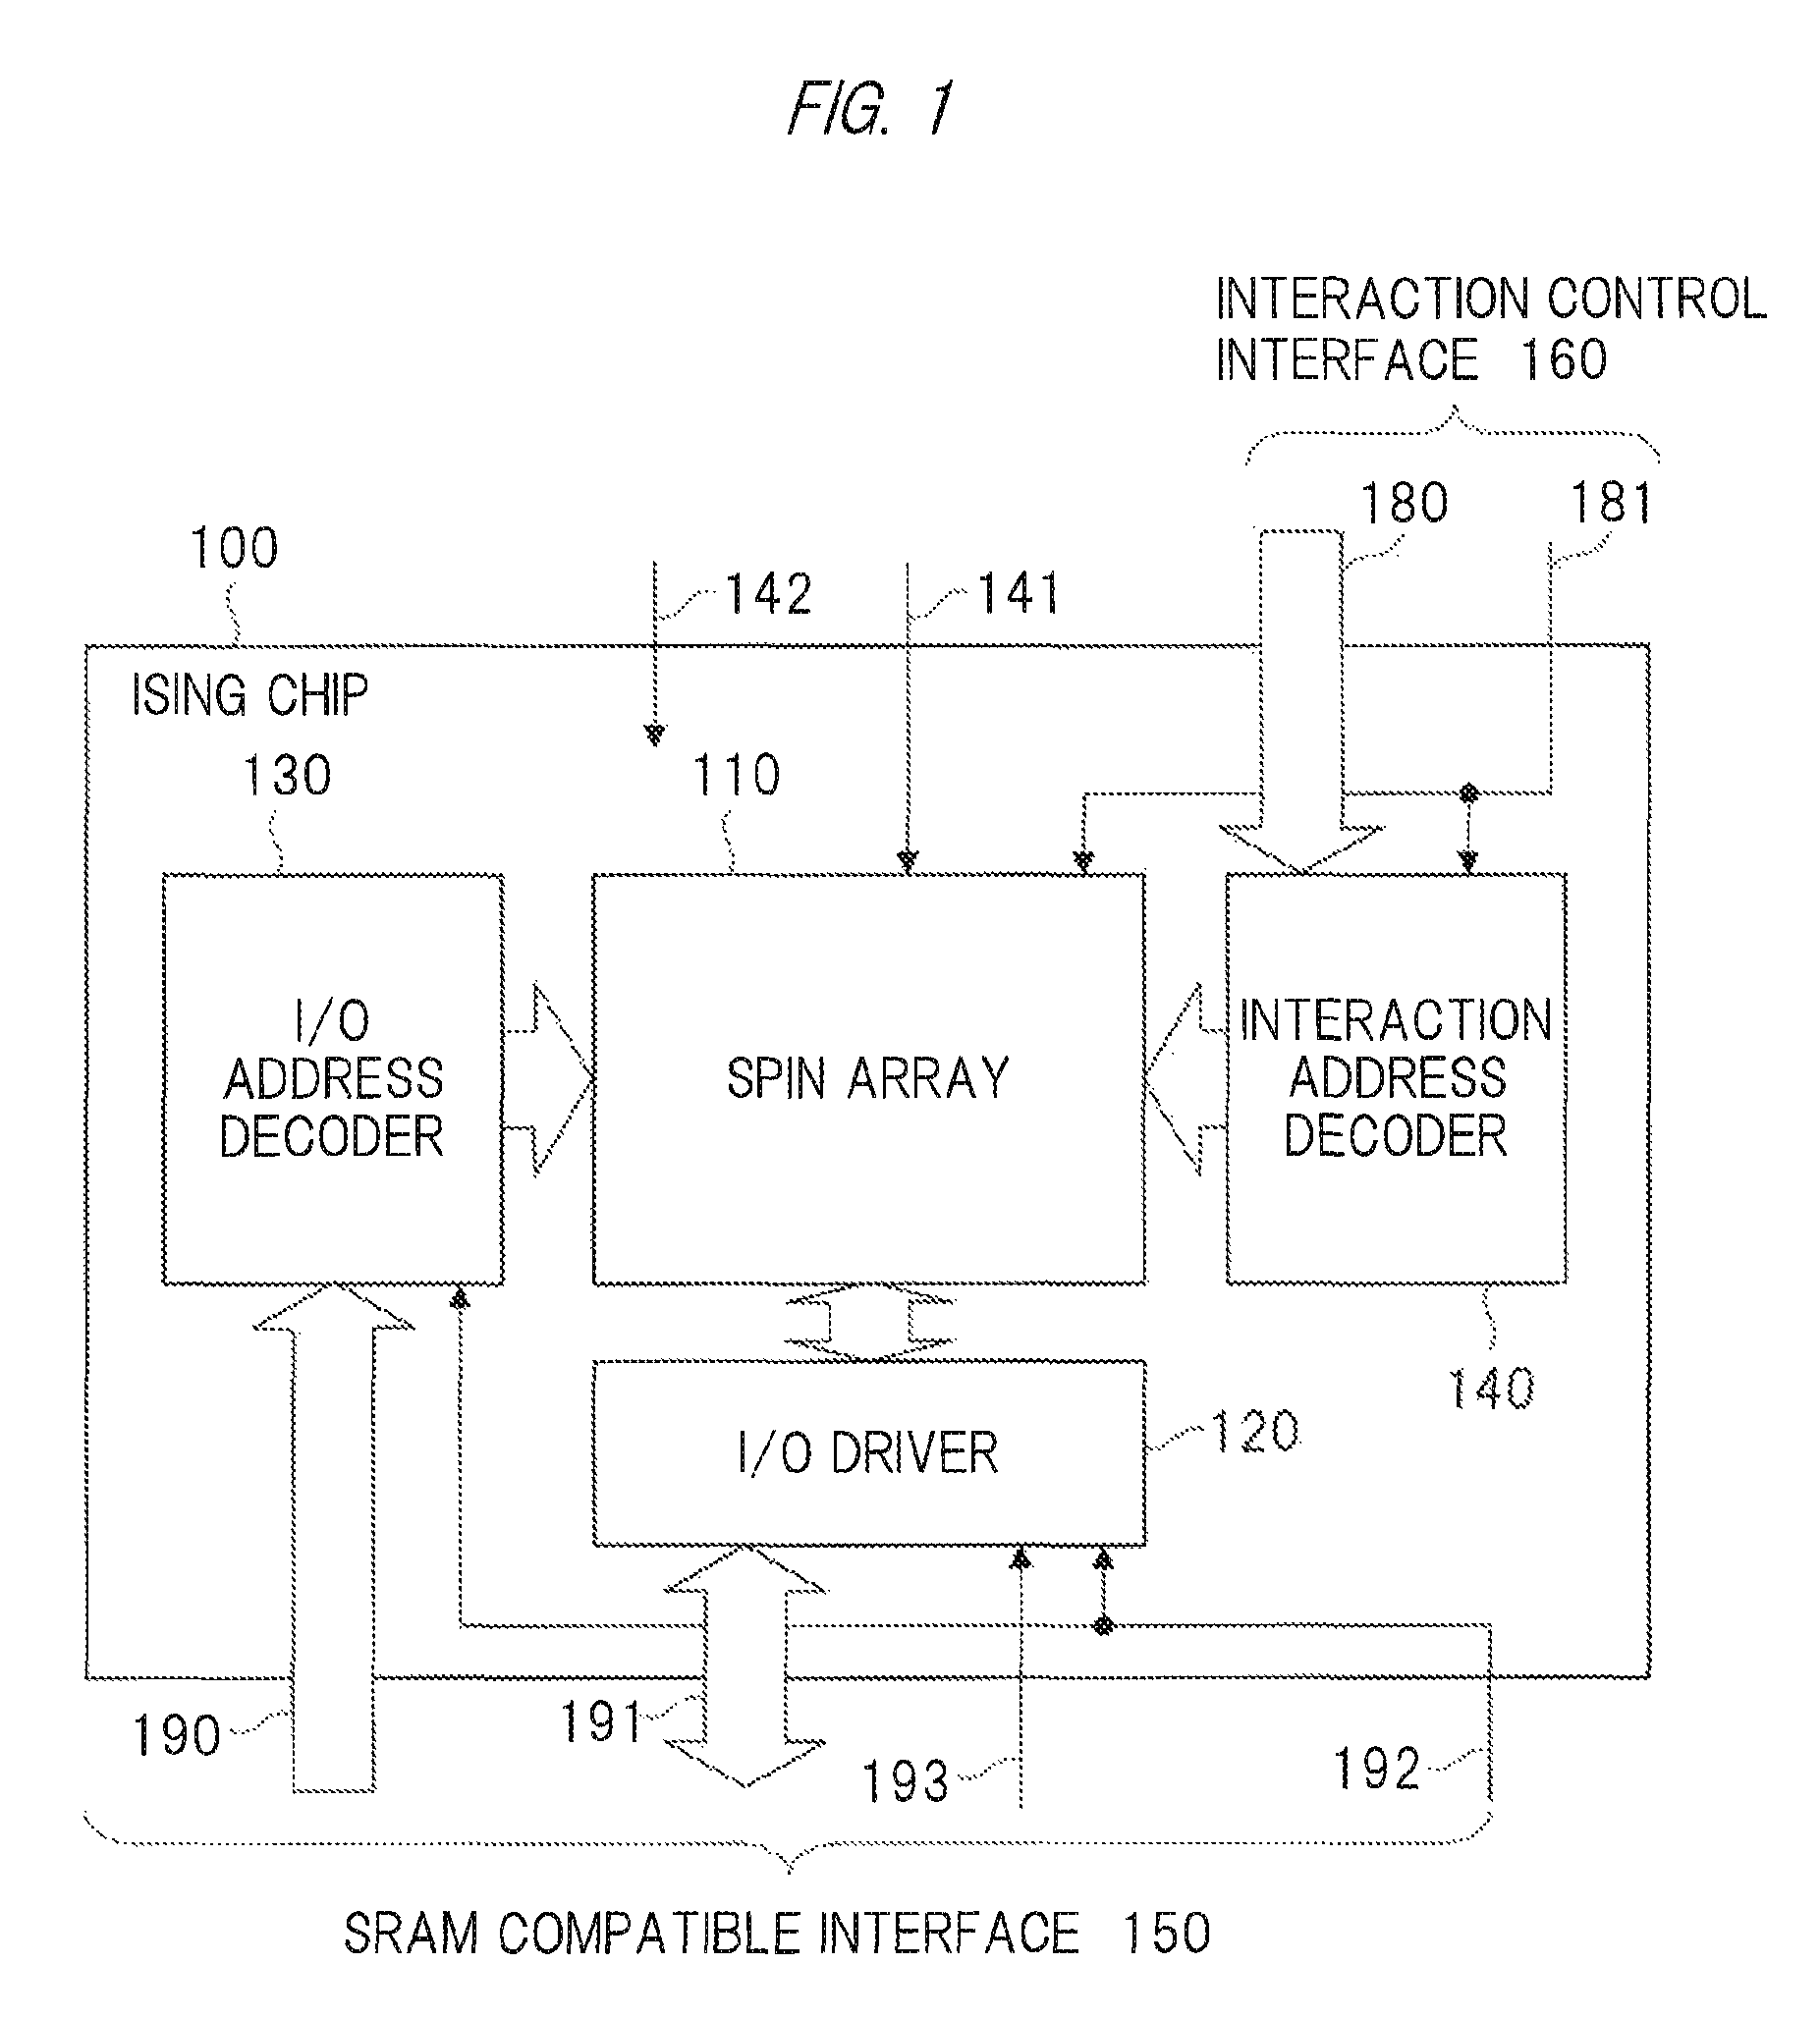 Semiconductor system for implementing an ising model of interaction